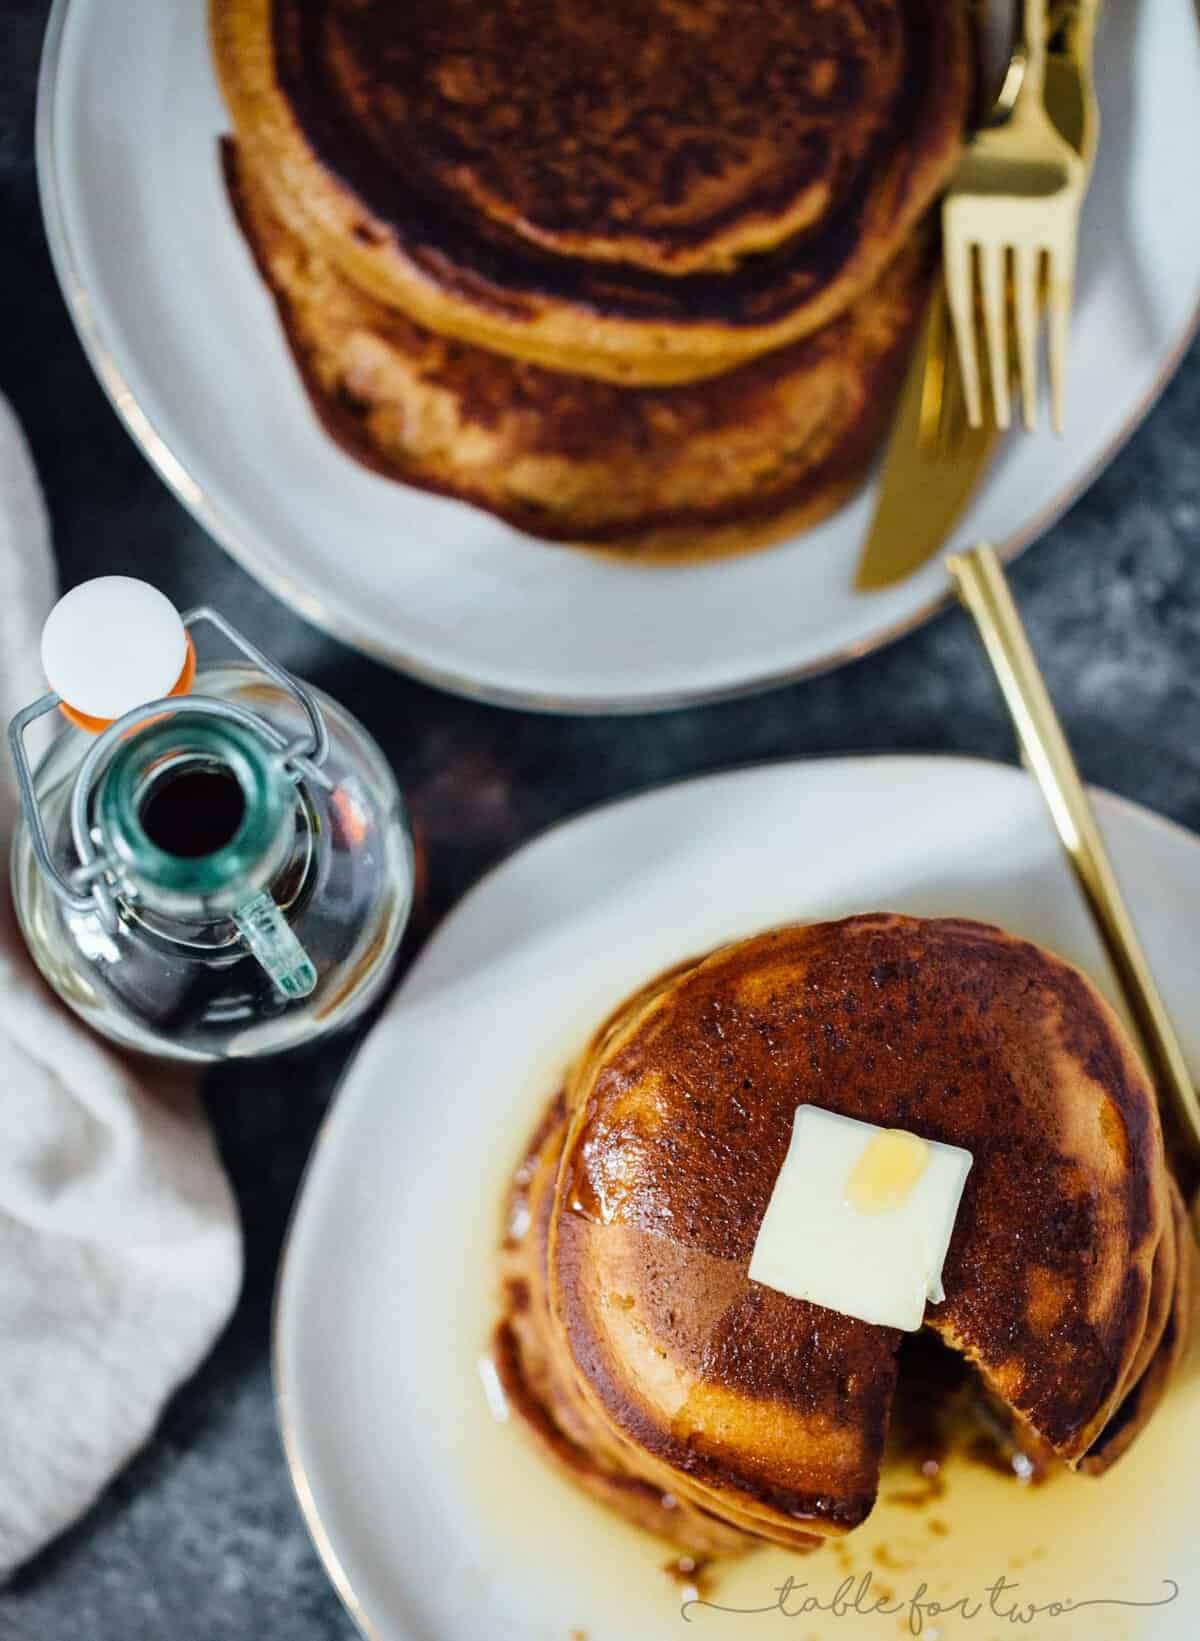 Fluffy and full of gingerbread flavor, these gingerbread pancakes are the perfect breakfast or brunch item to have on hand!